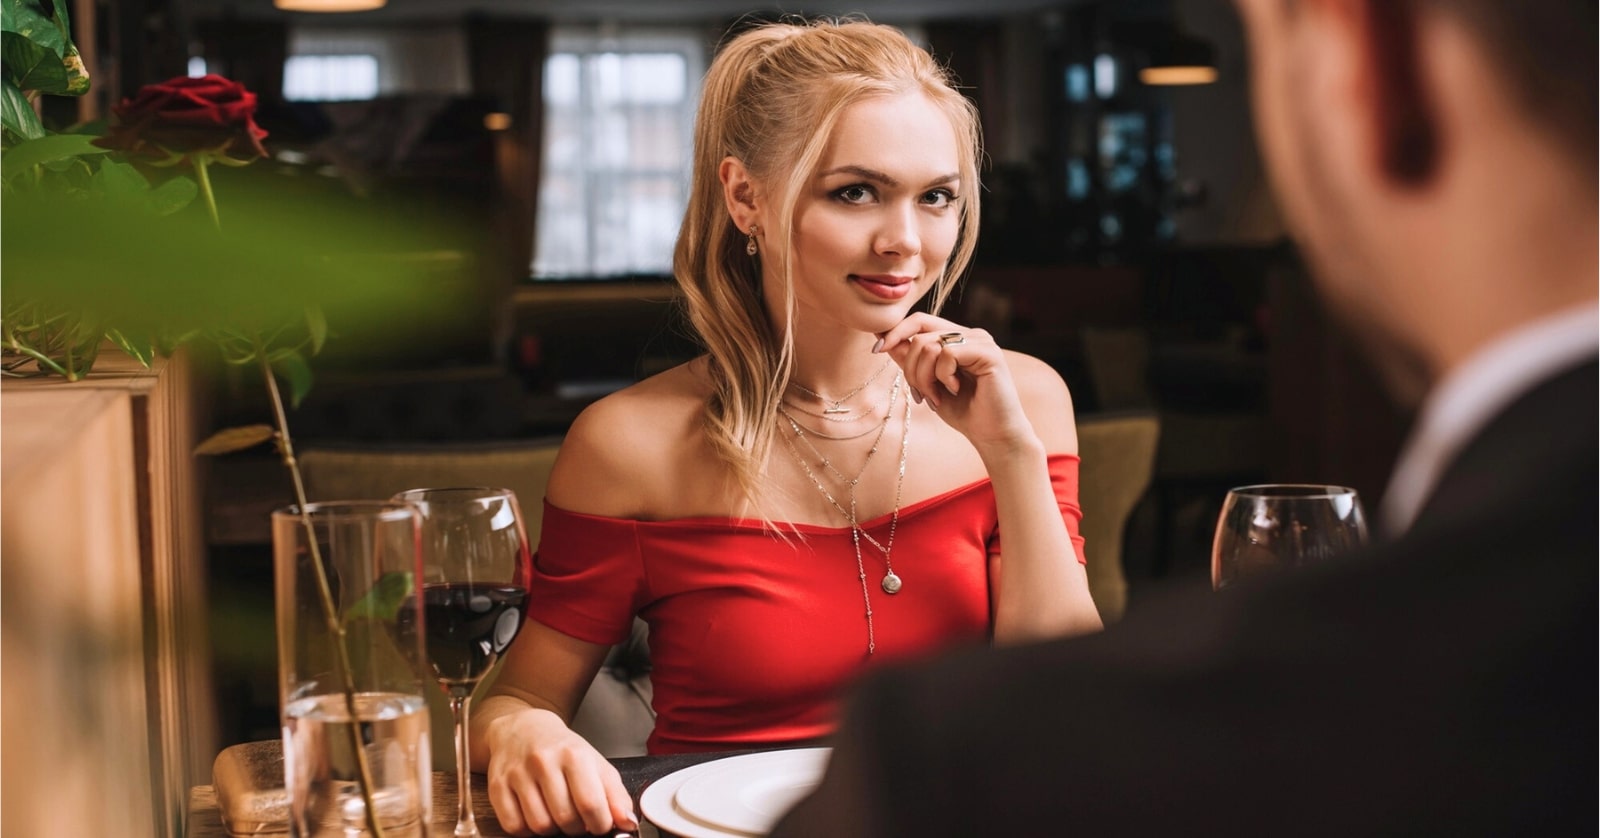 A woman with blonde hair, tied in a ponytail, sits at a restaurant table adorned with wine glasses, a red rose, and plates. She wears a red off-shoulder top and jewelry, and looks across the table with a soft smile, while a man, slightly blurred, faces her.